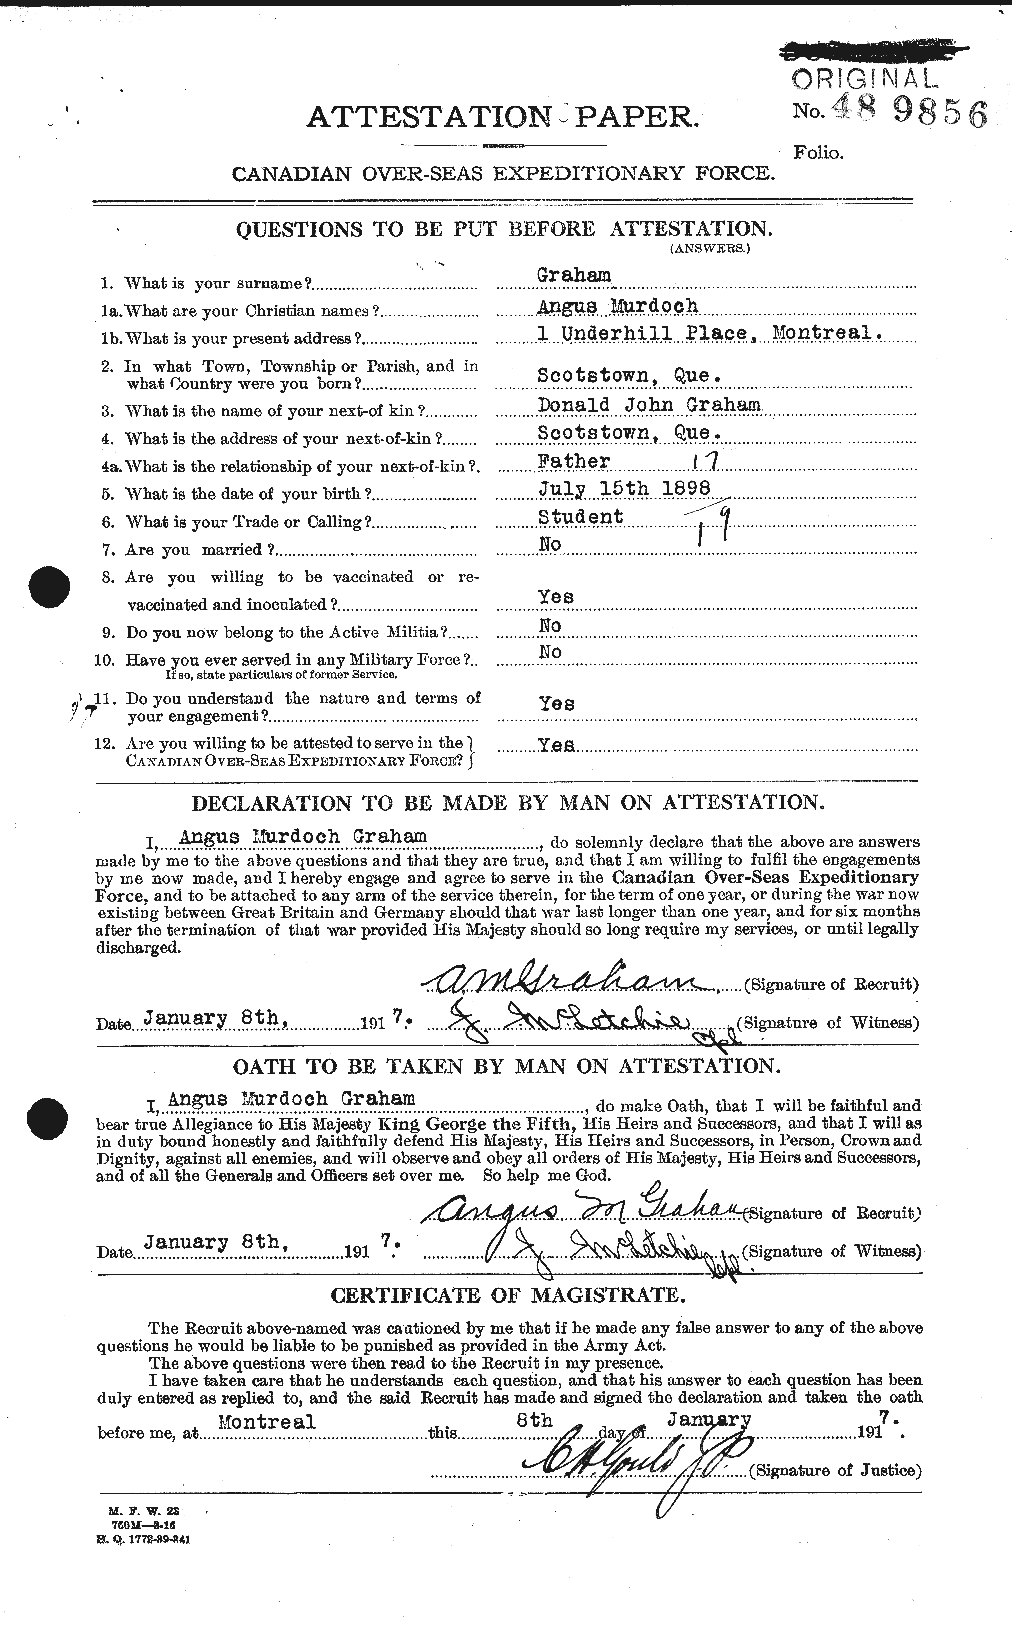 Personnel Records of the First World War - CEF 359627a